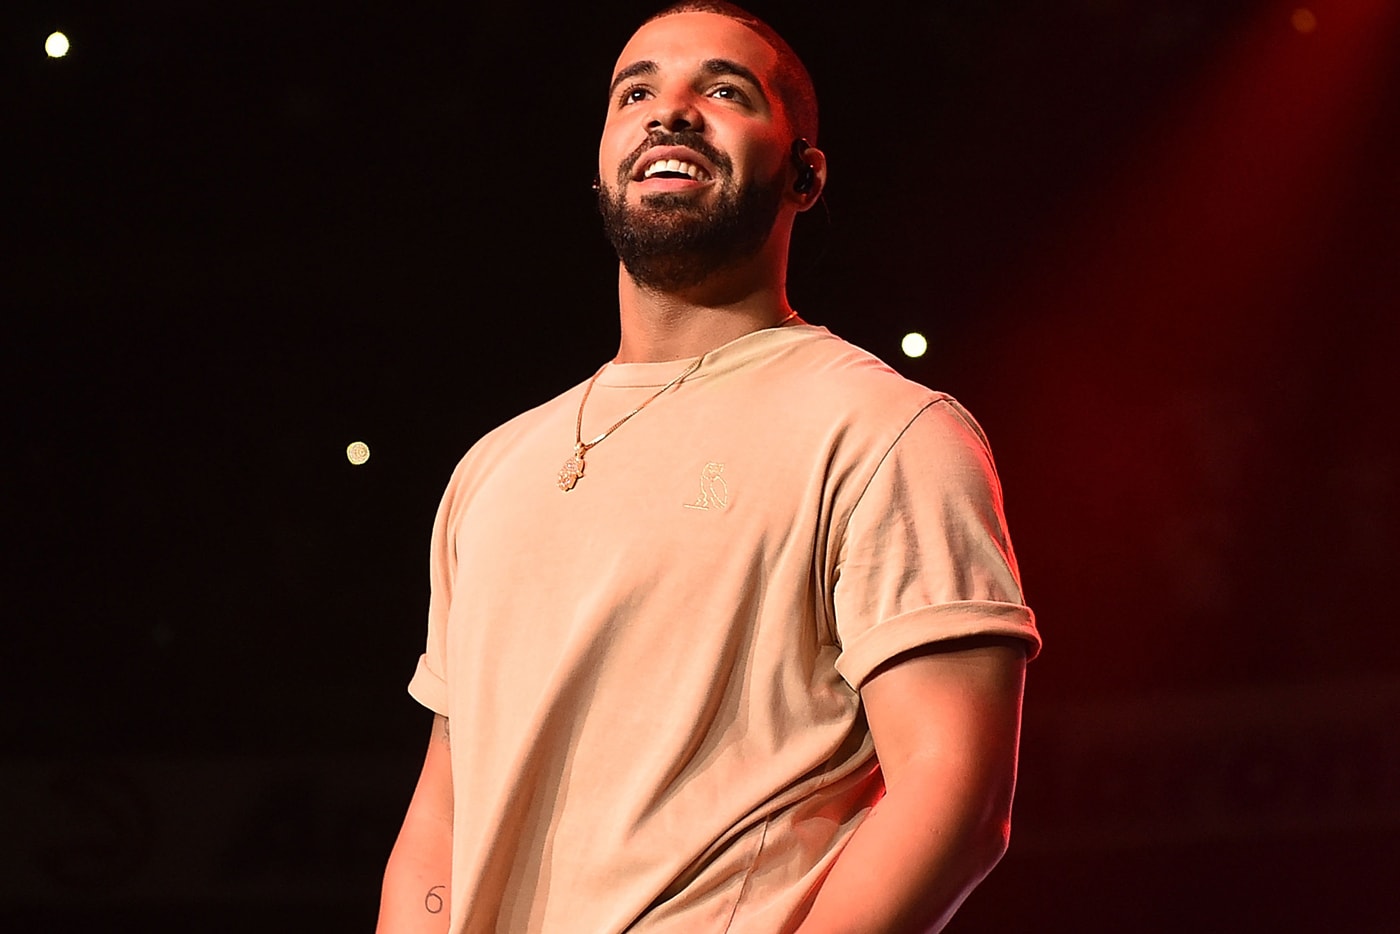 Drake & Kendrick Lamar Hit Up Chance The Rapper After His GRAMMY Wins